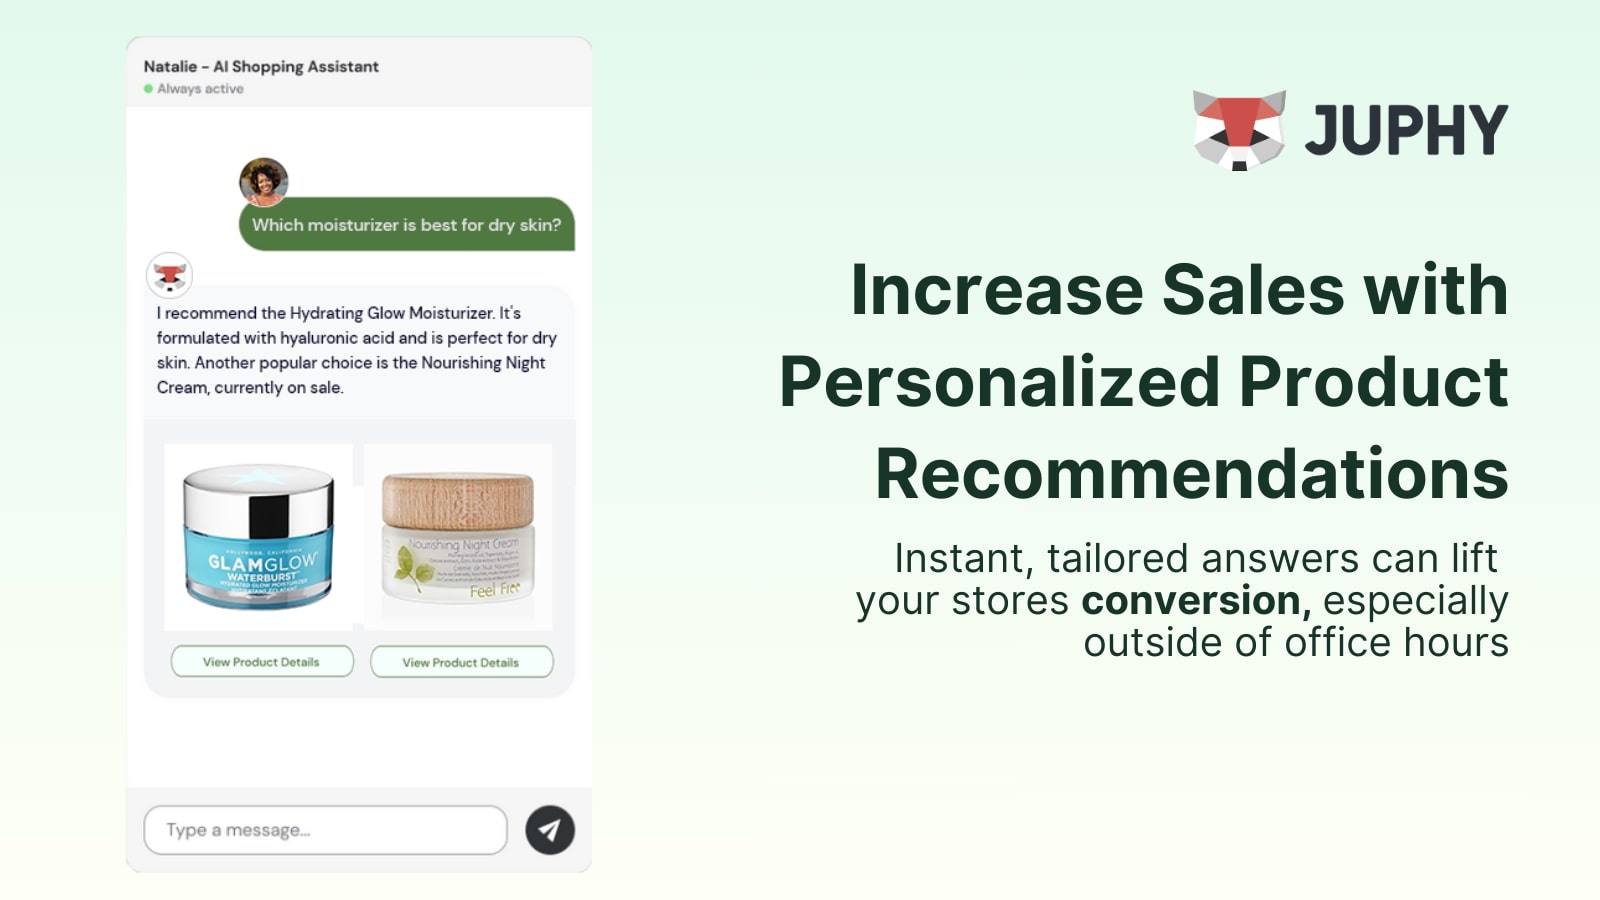 Juphy AI provides personalized product recommendations and round-the-clock customer support.